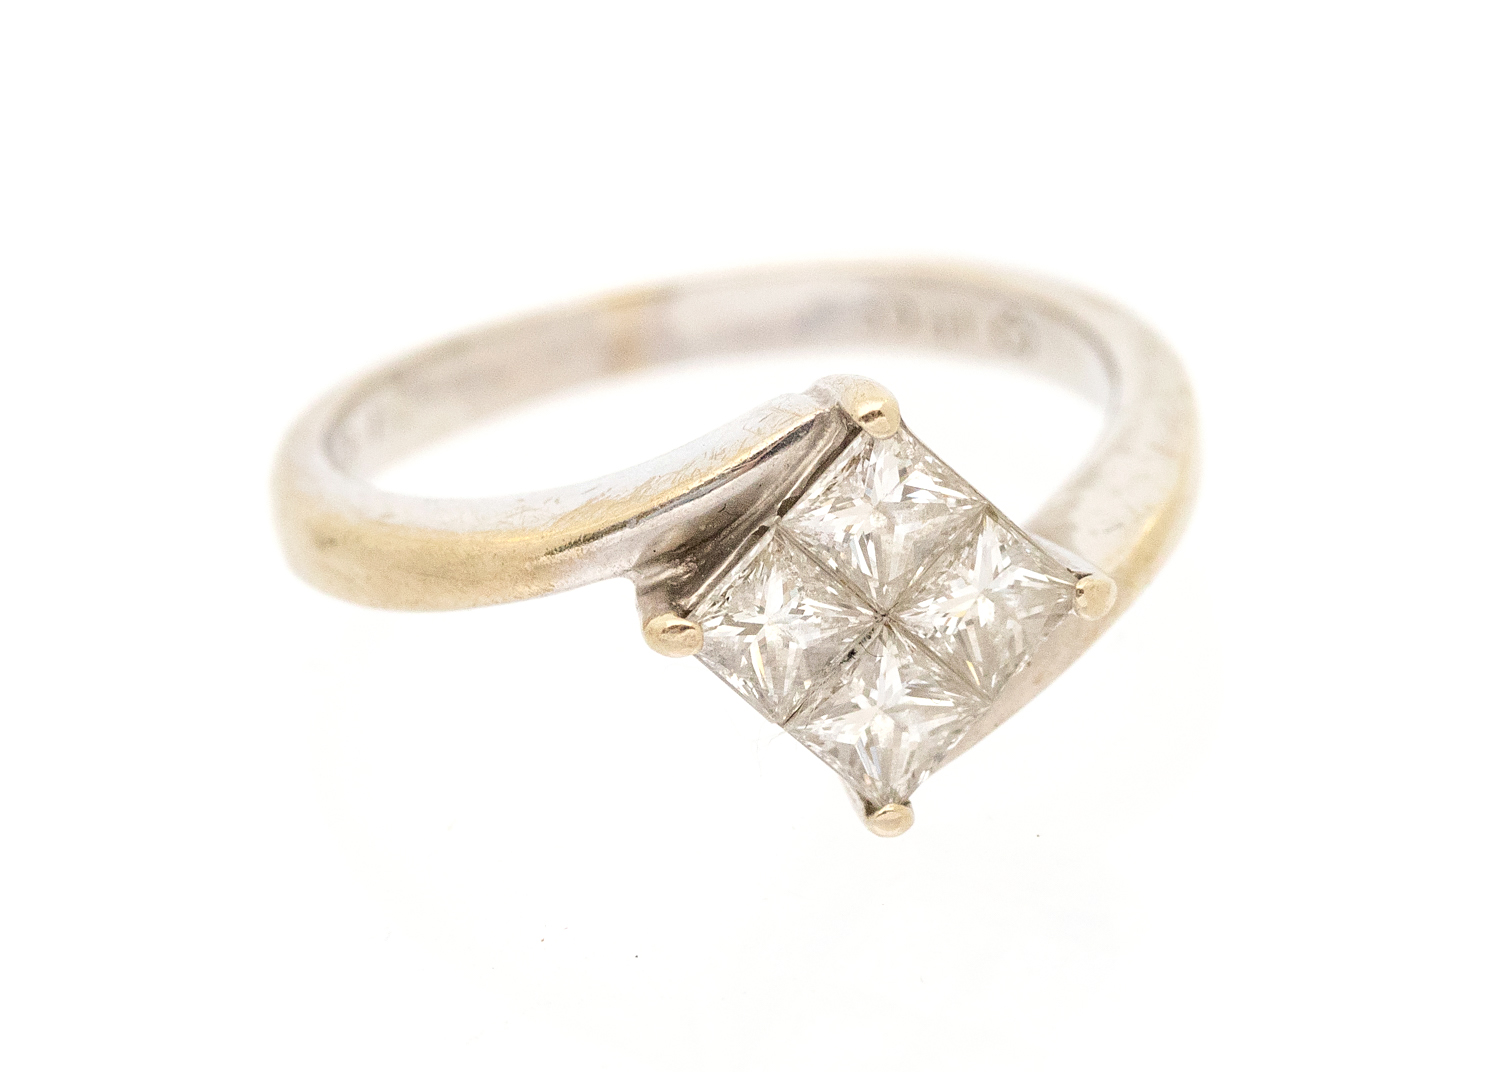 ****AUCTIONEER TO ANNOUNCE 9CT GOLD NOT 18CT GOLD*** A diamond and 9ct white gold ring, comprising